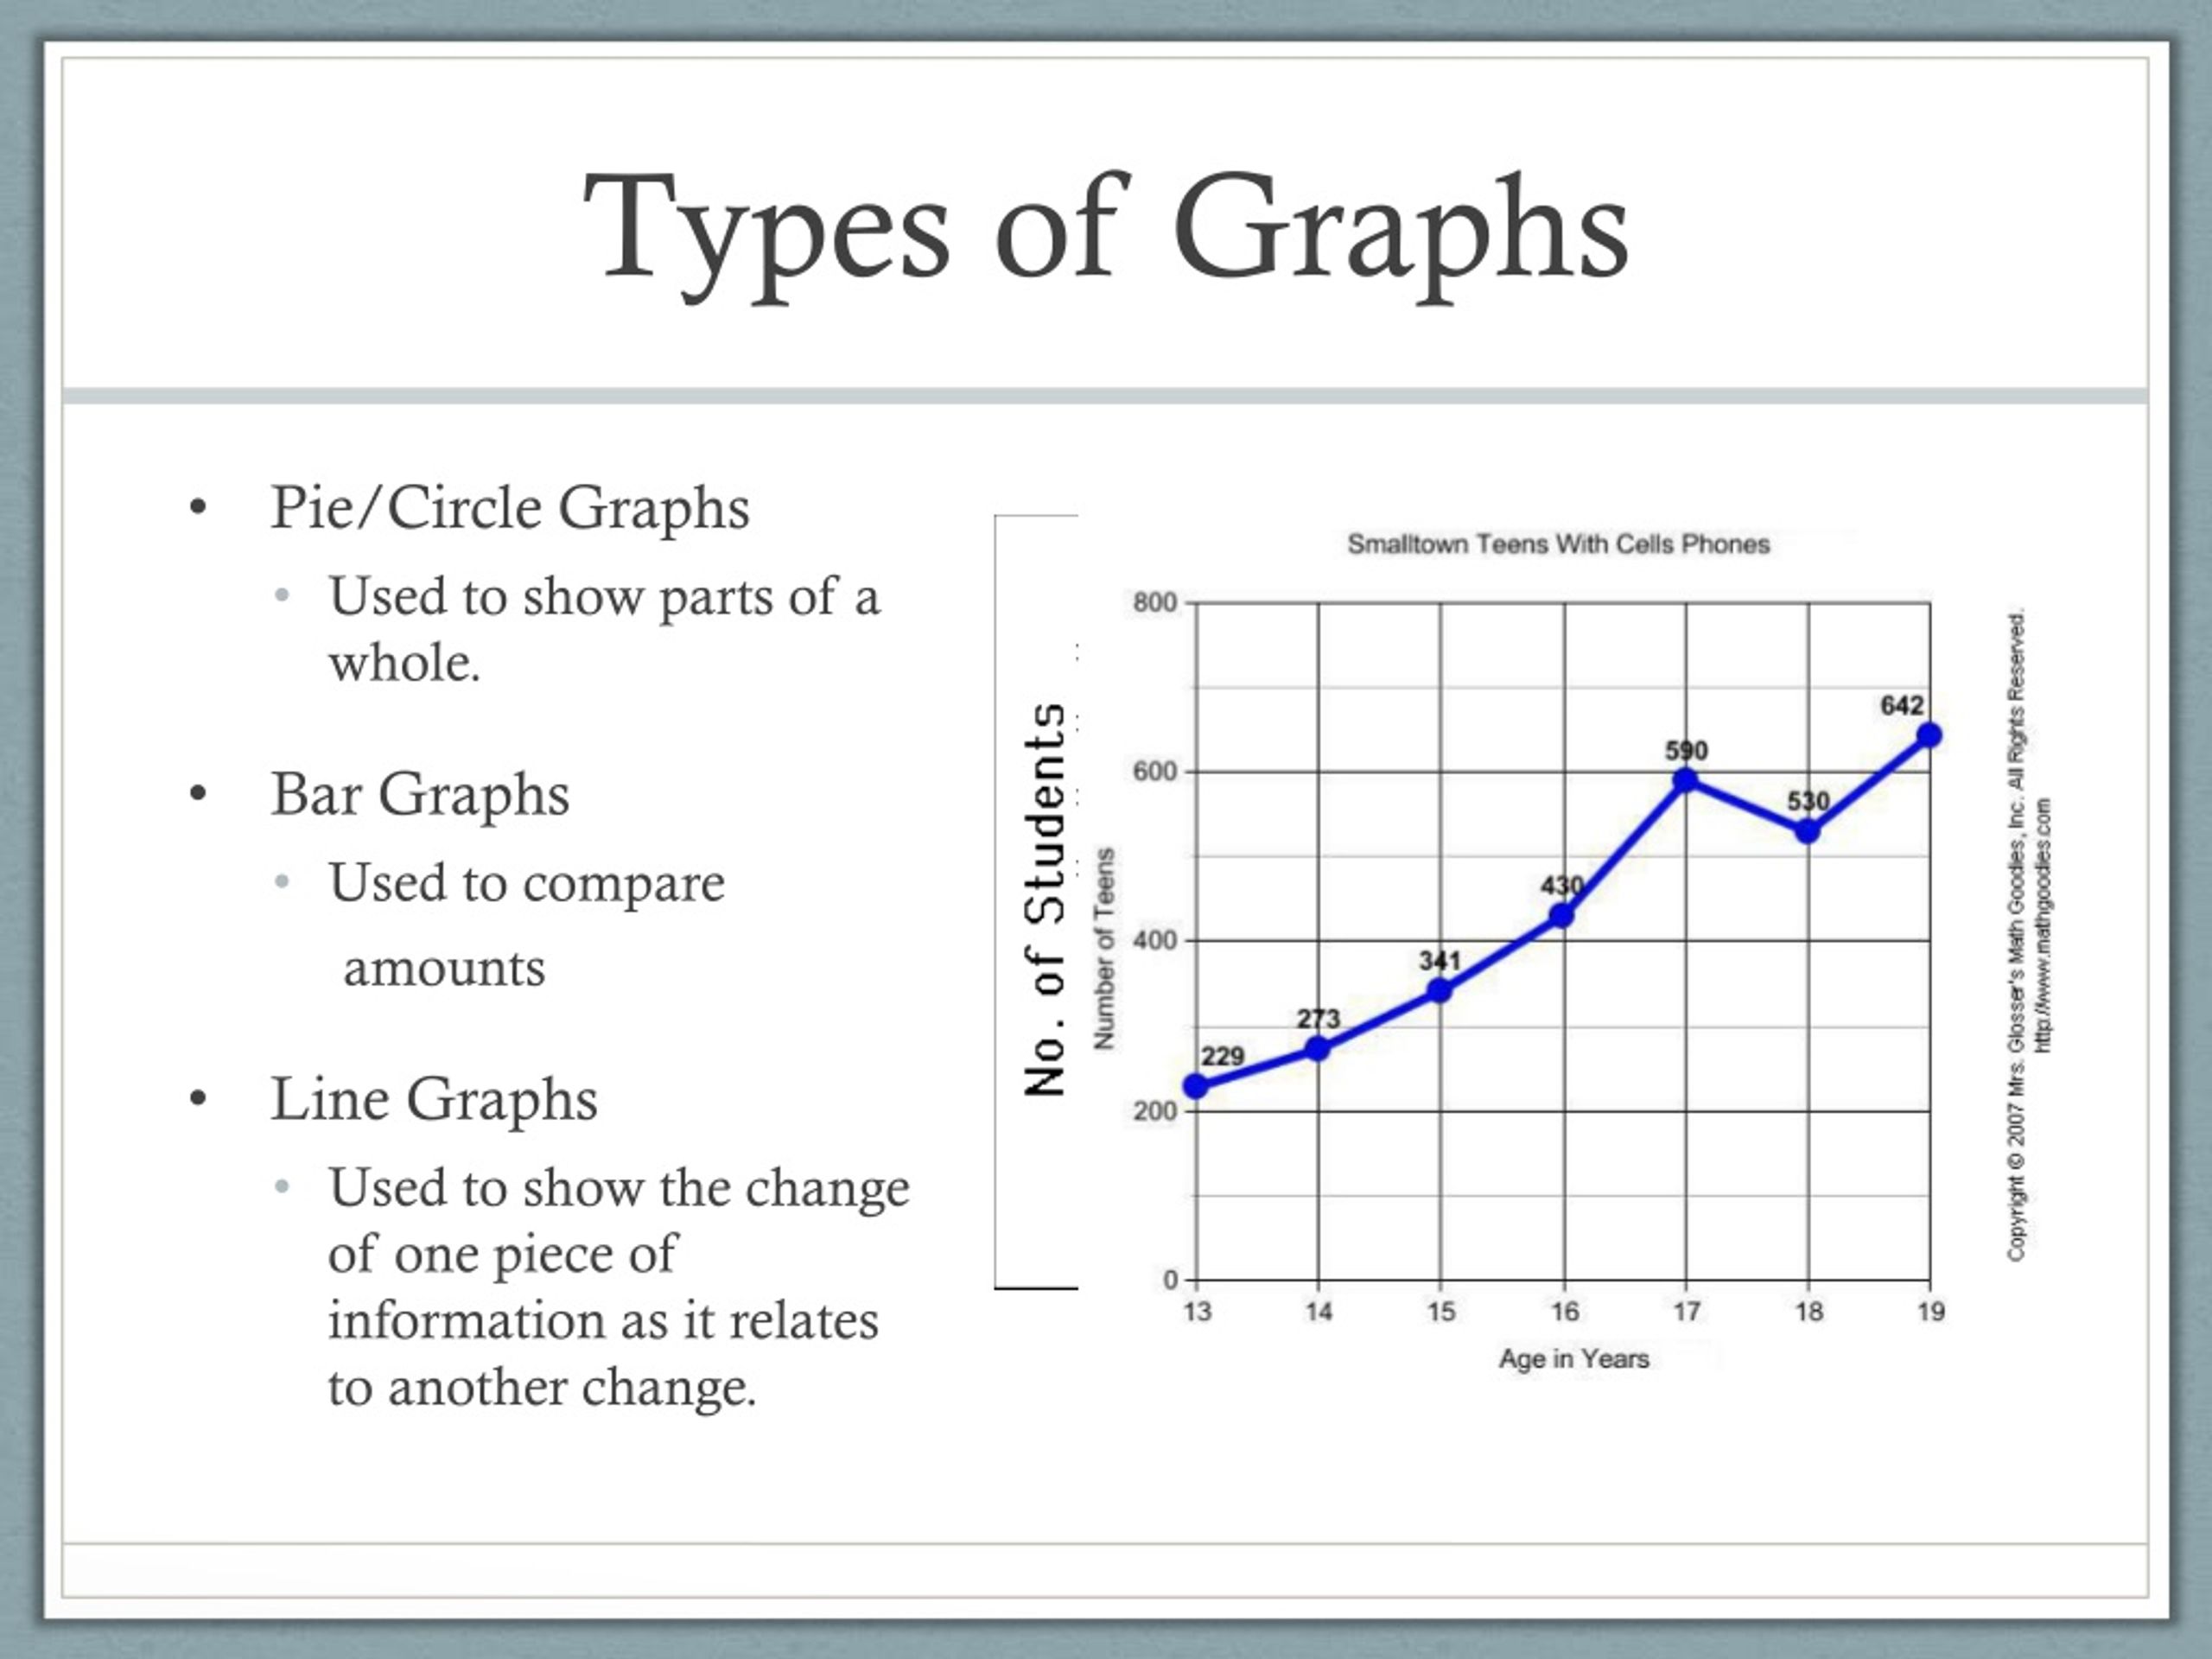 PPT - Graphing and Analyzing Scientific Data PowerPoint Presentation ...